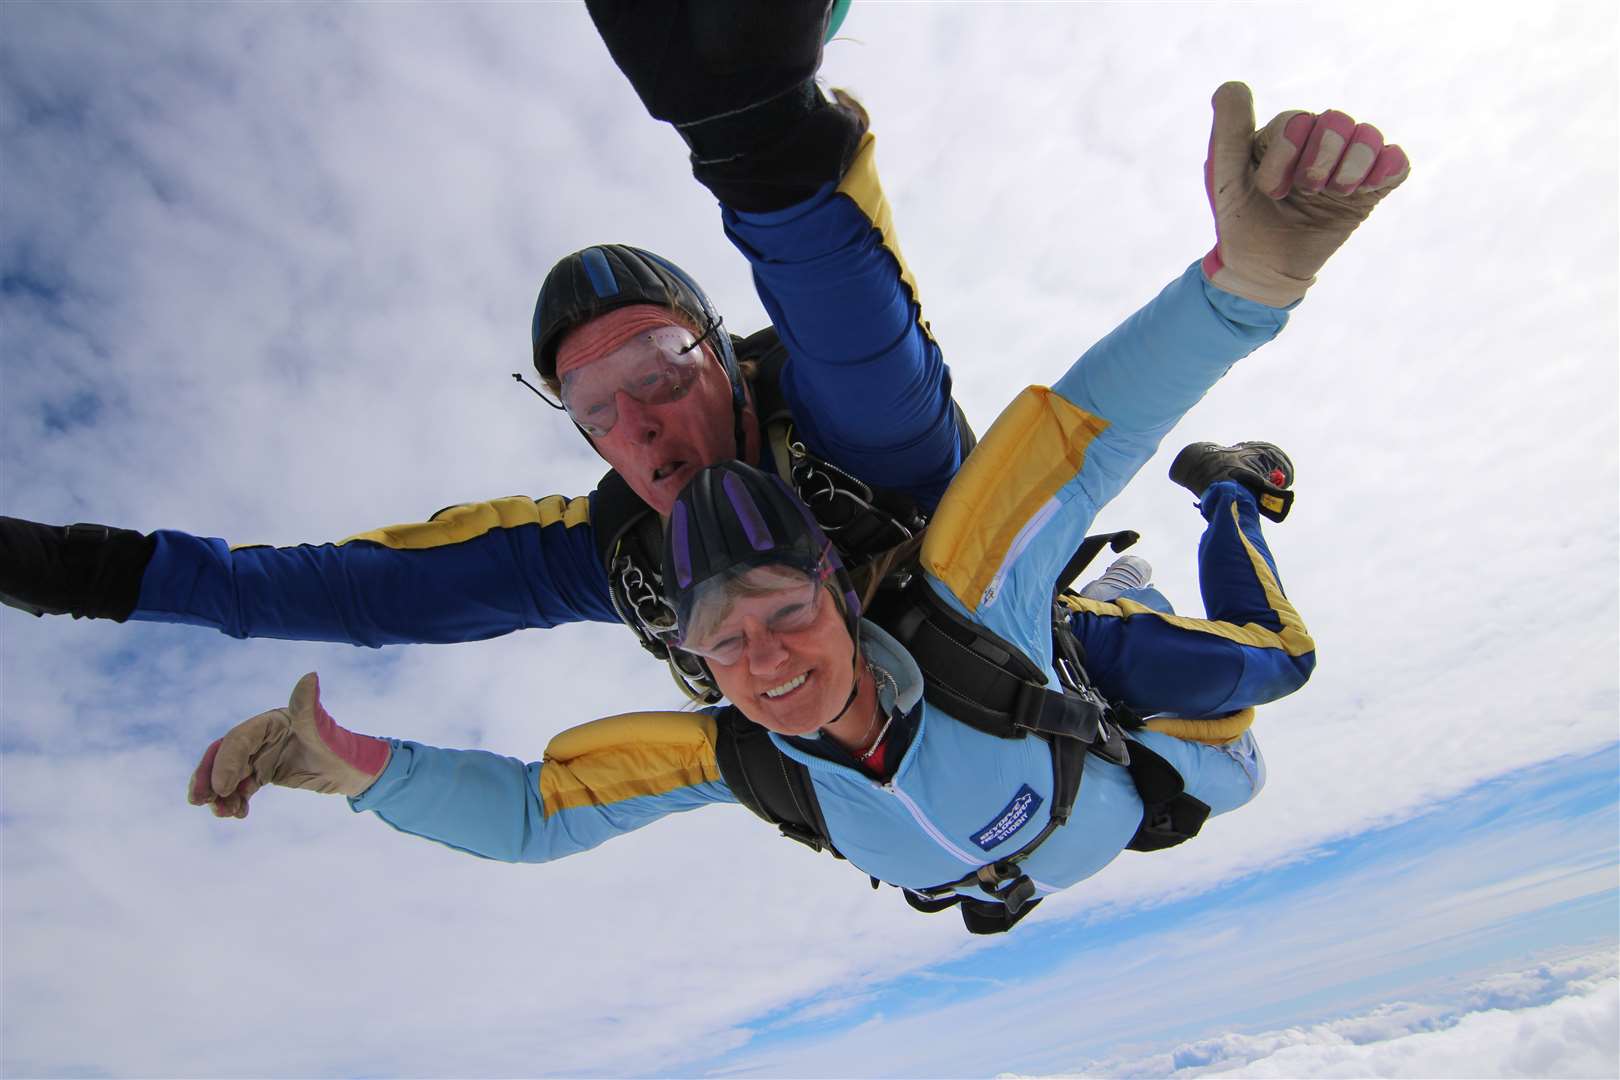 Denise Small raised nearly £20,000 by doing the skydive at Headcorn. Picture: AirAffair Skydiving Ltd